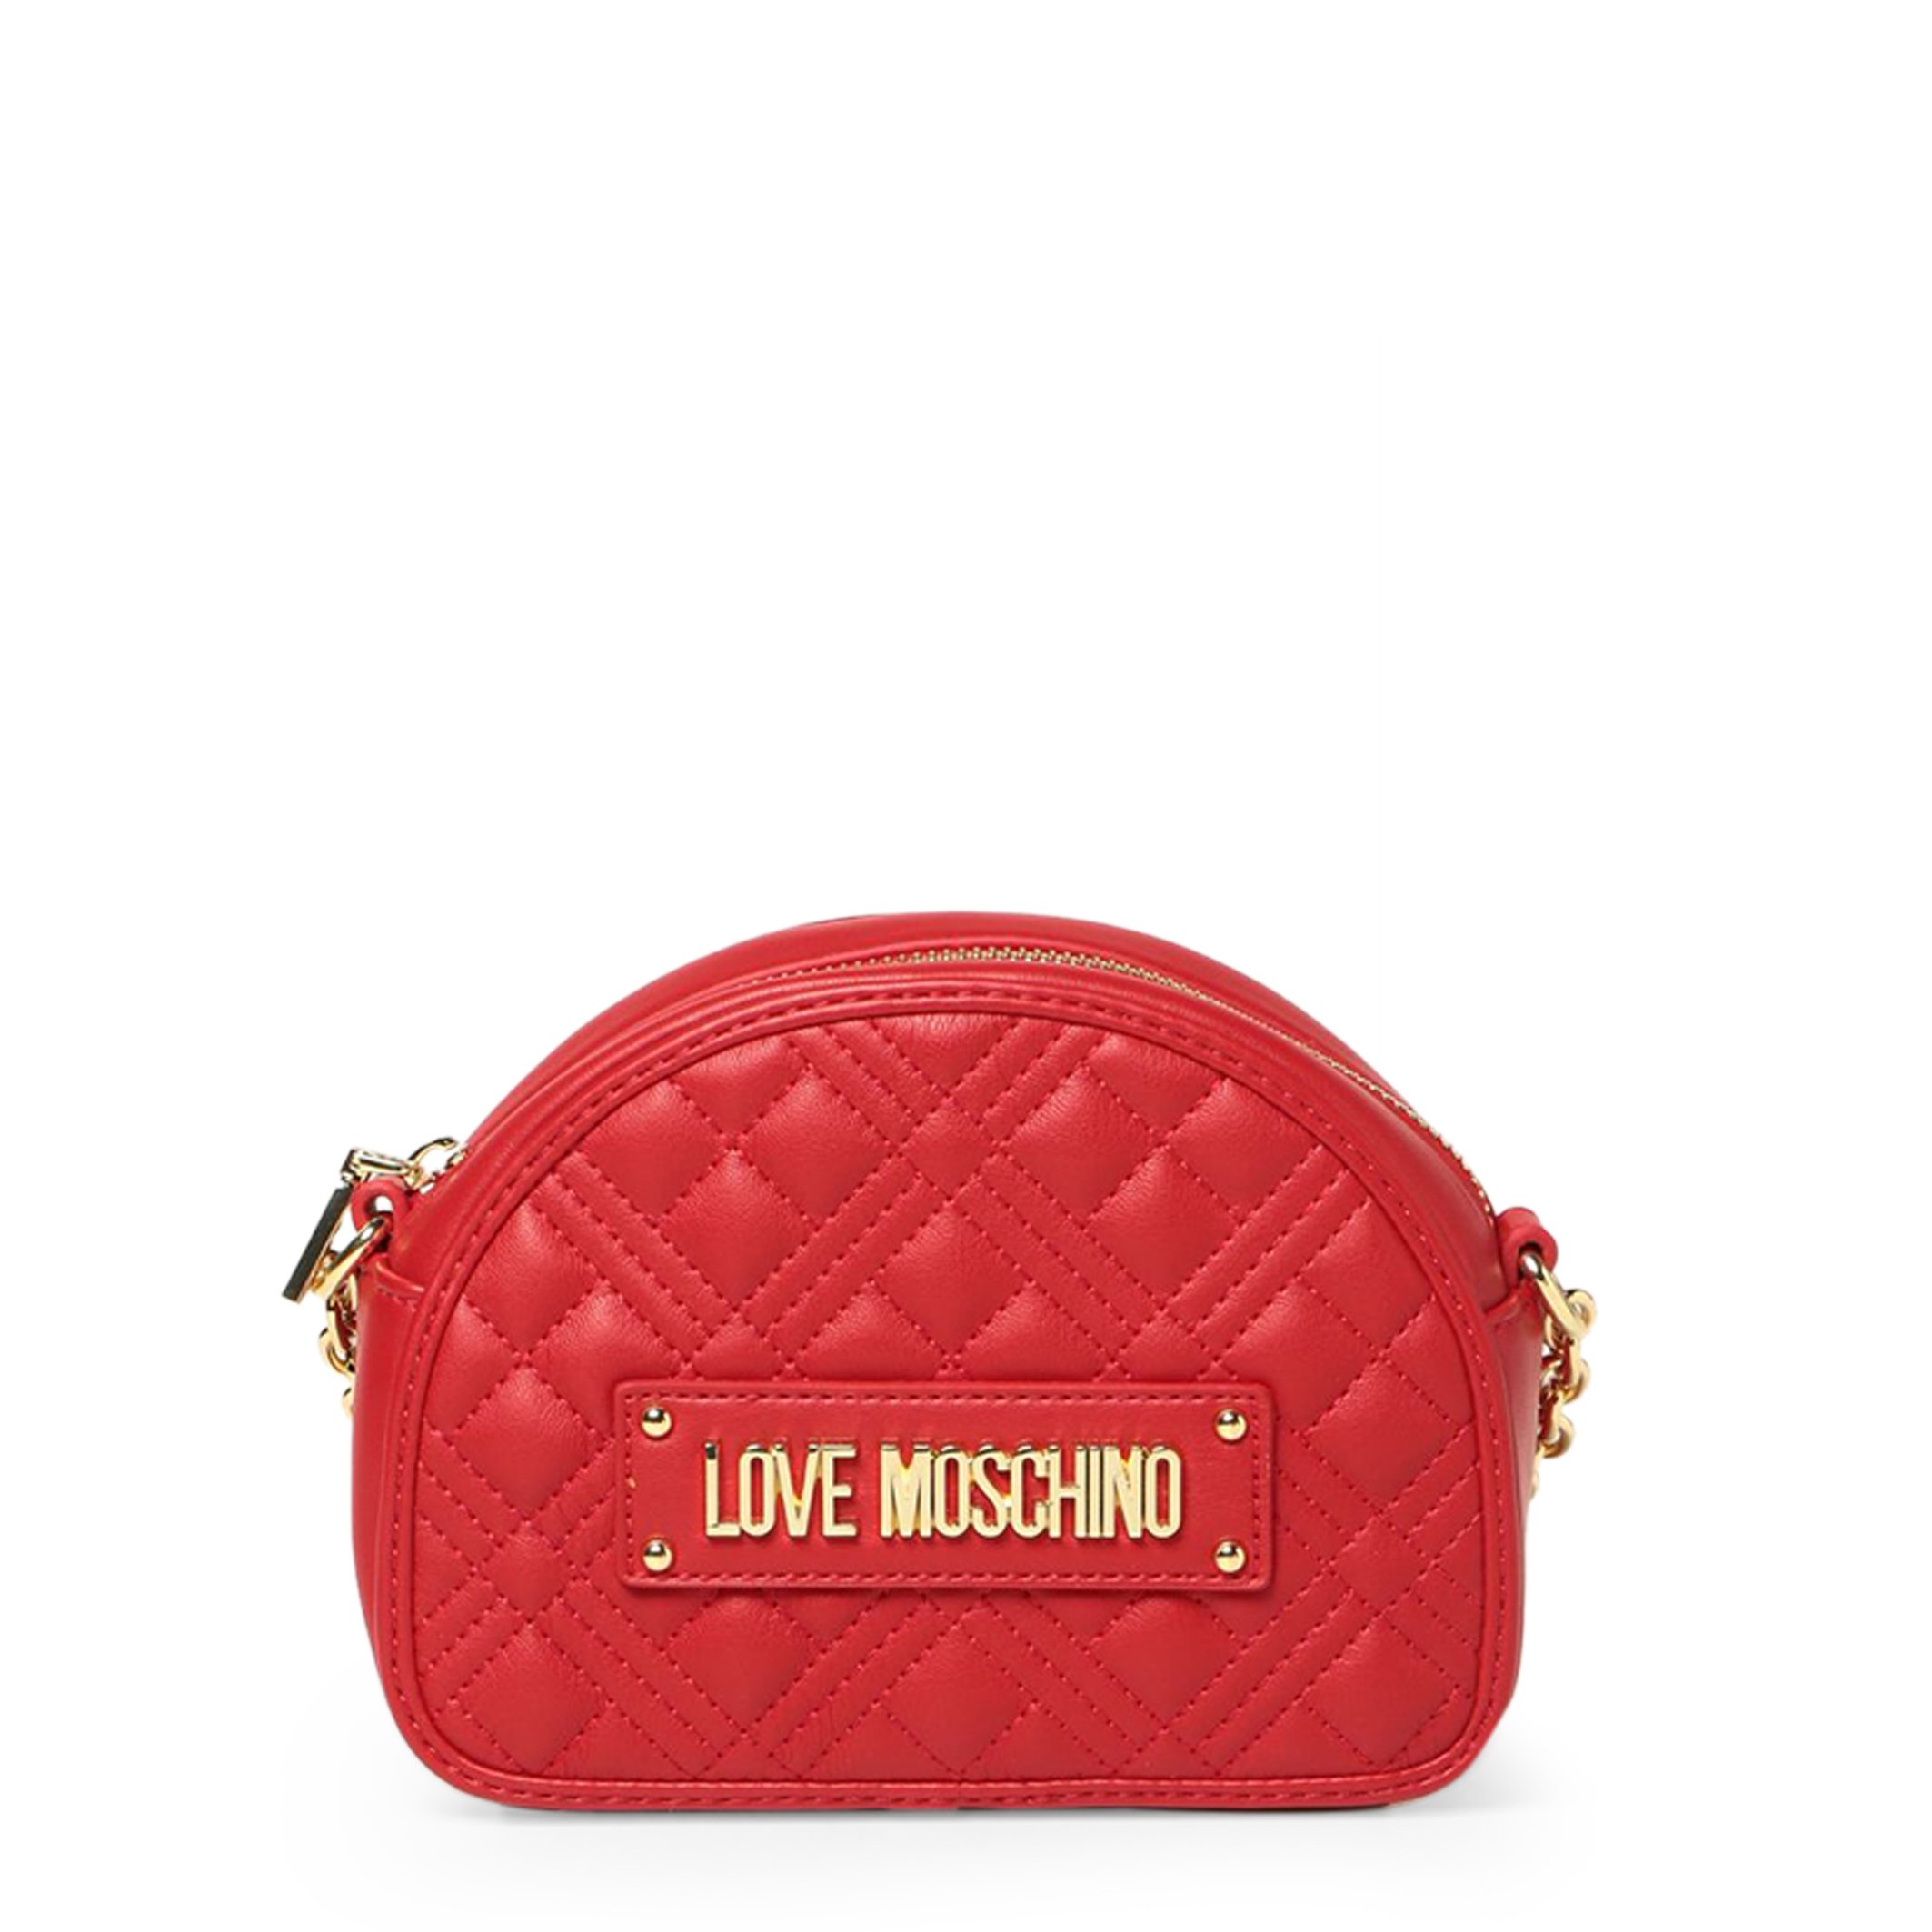 Love Moschino Women's Crossbody Bag Various Colours JC4004PP1DLA0 - red NOSIZE